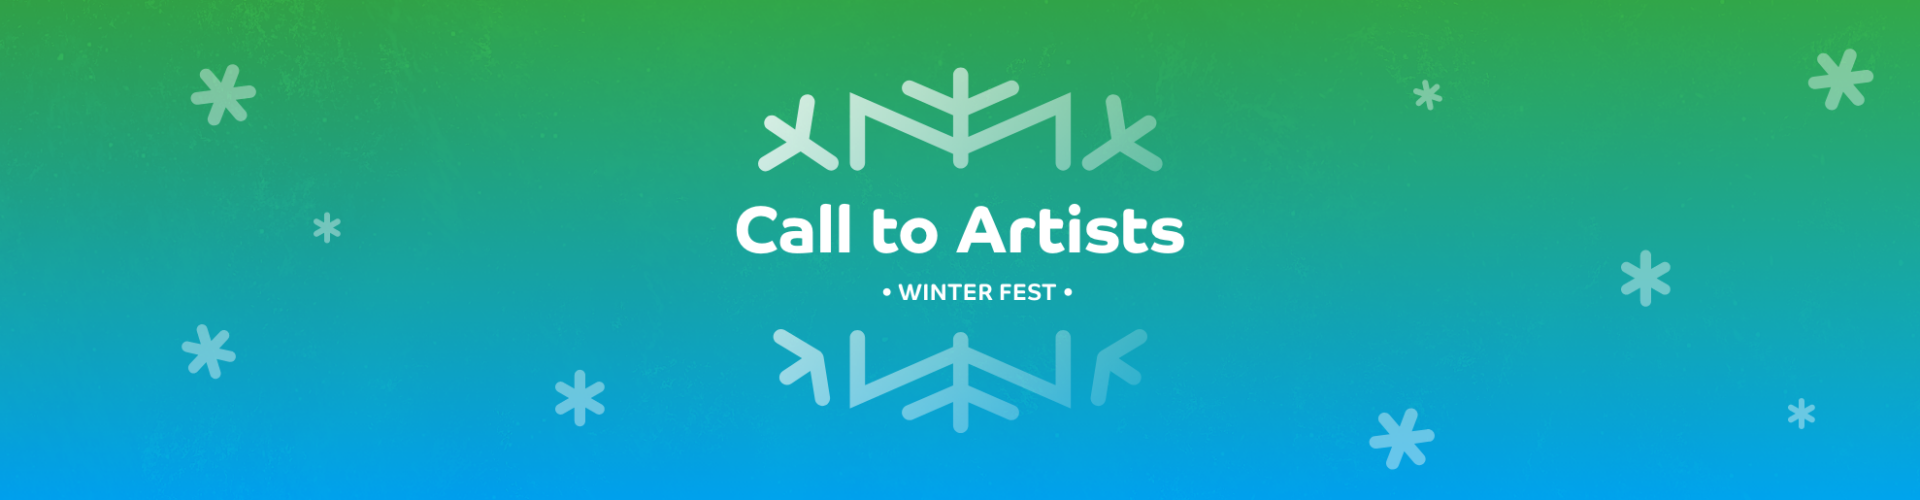 Winter Works Call to Artists